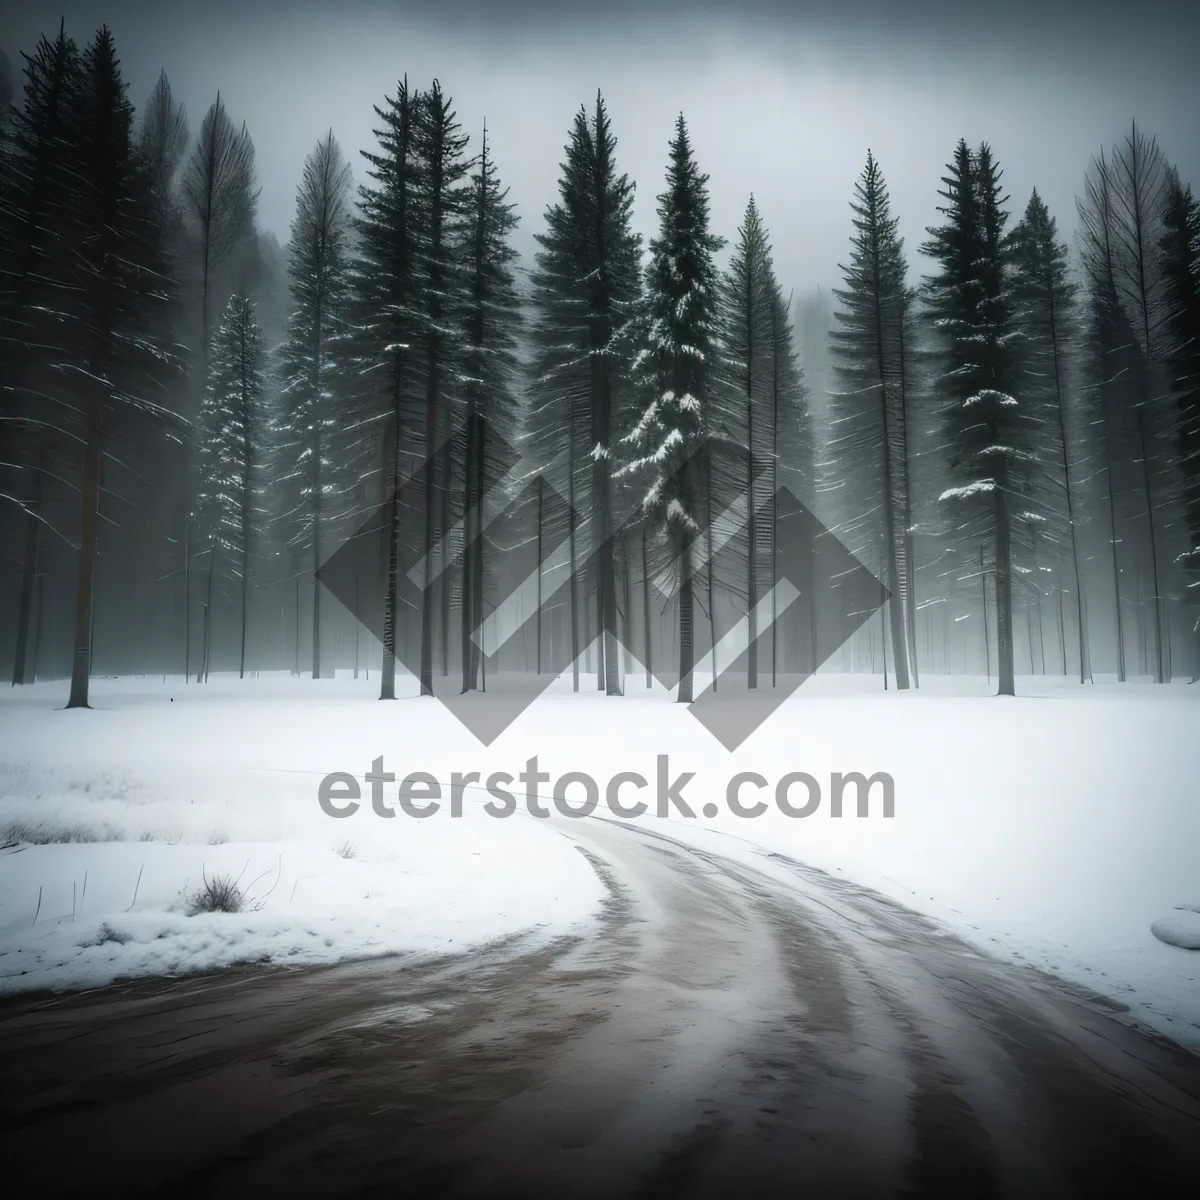 Picture of Winter Wonderland: Majestic snowy forest landscape with frozen slopes.